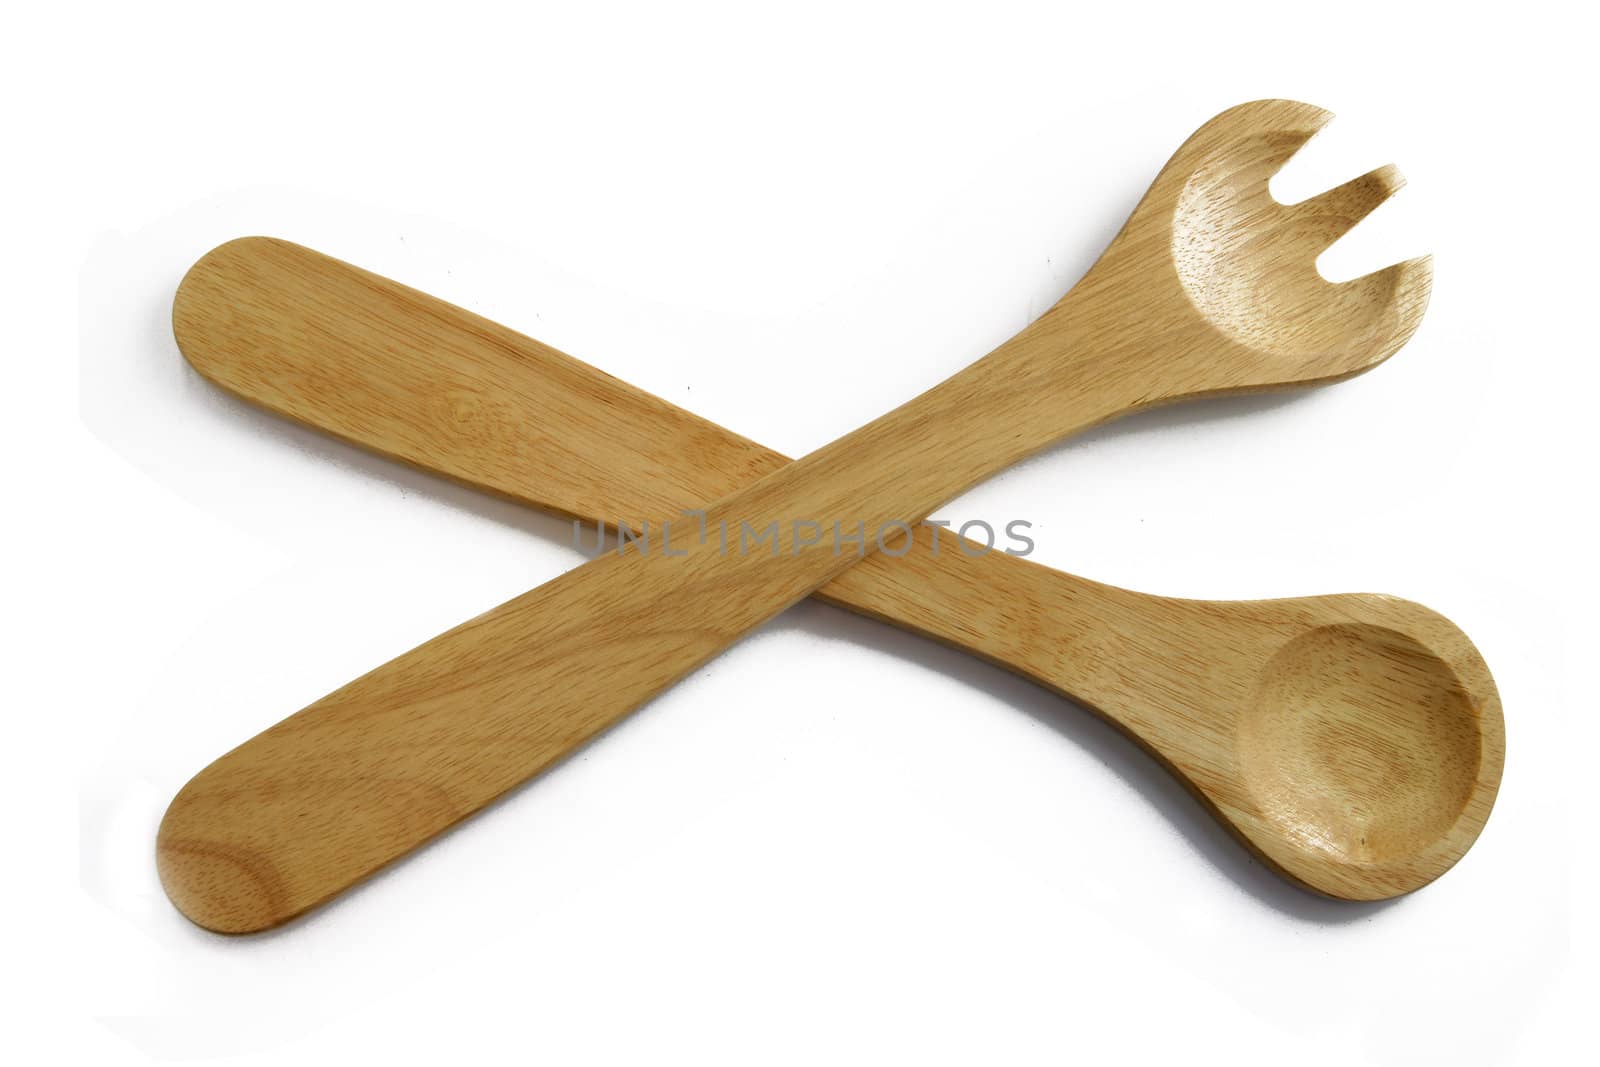 Wooden fork and spoon by phovoir